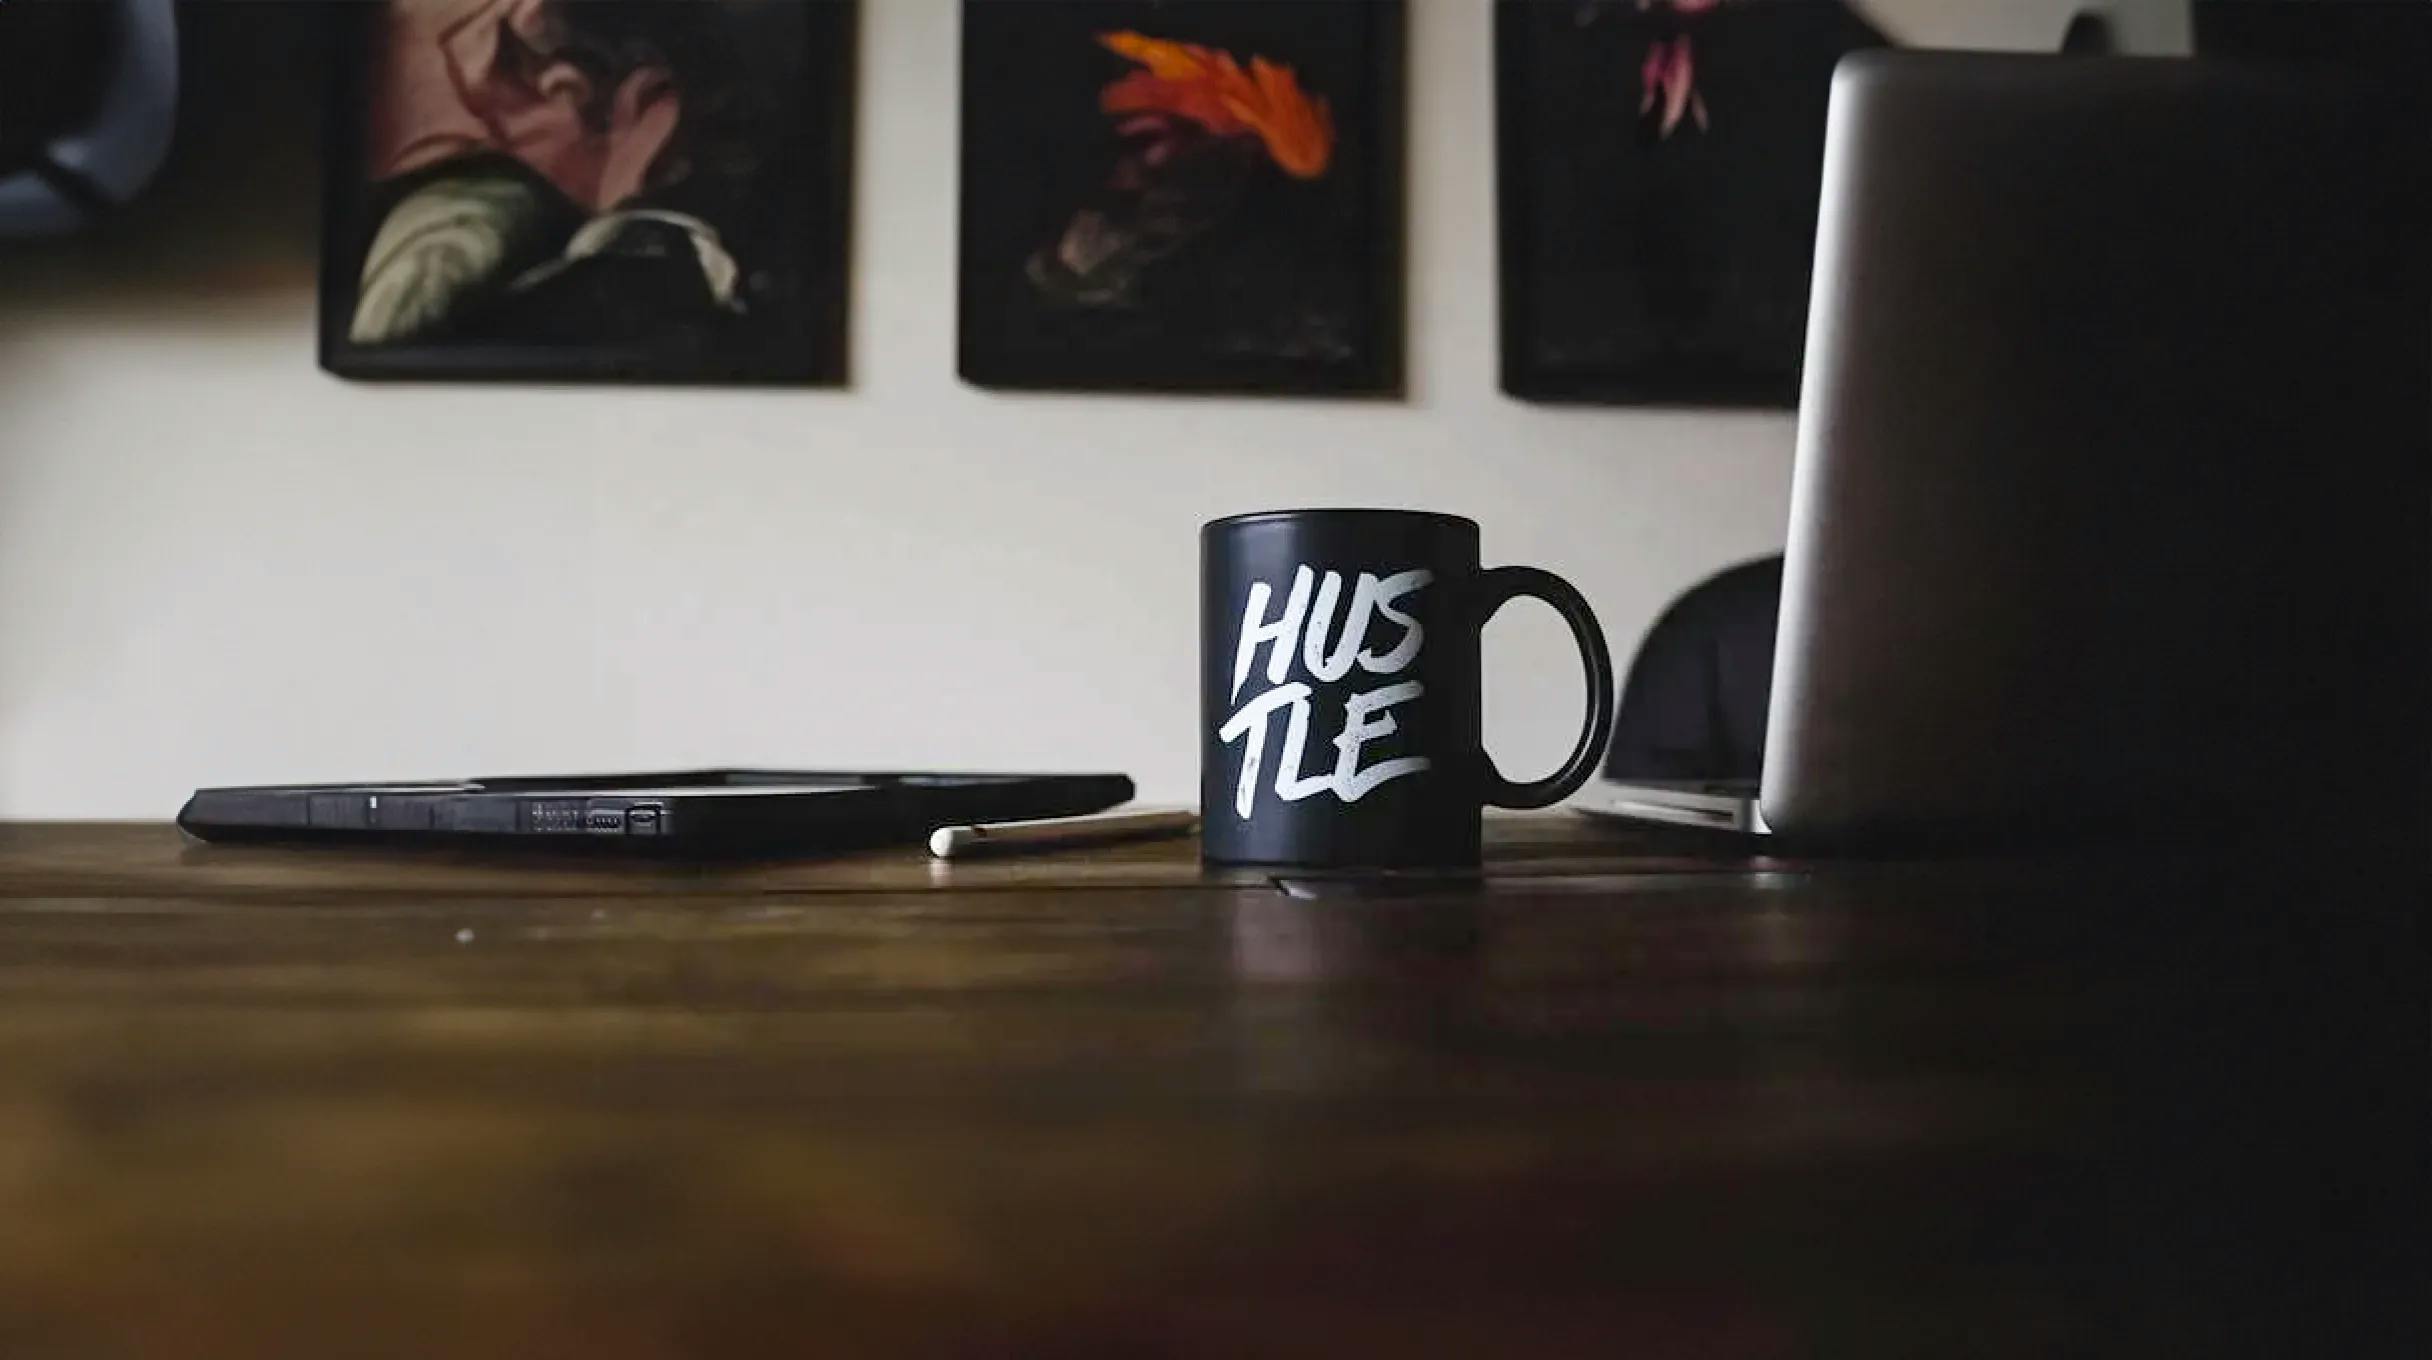 Cup standing on a desk with a "hustle" written on it